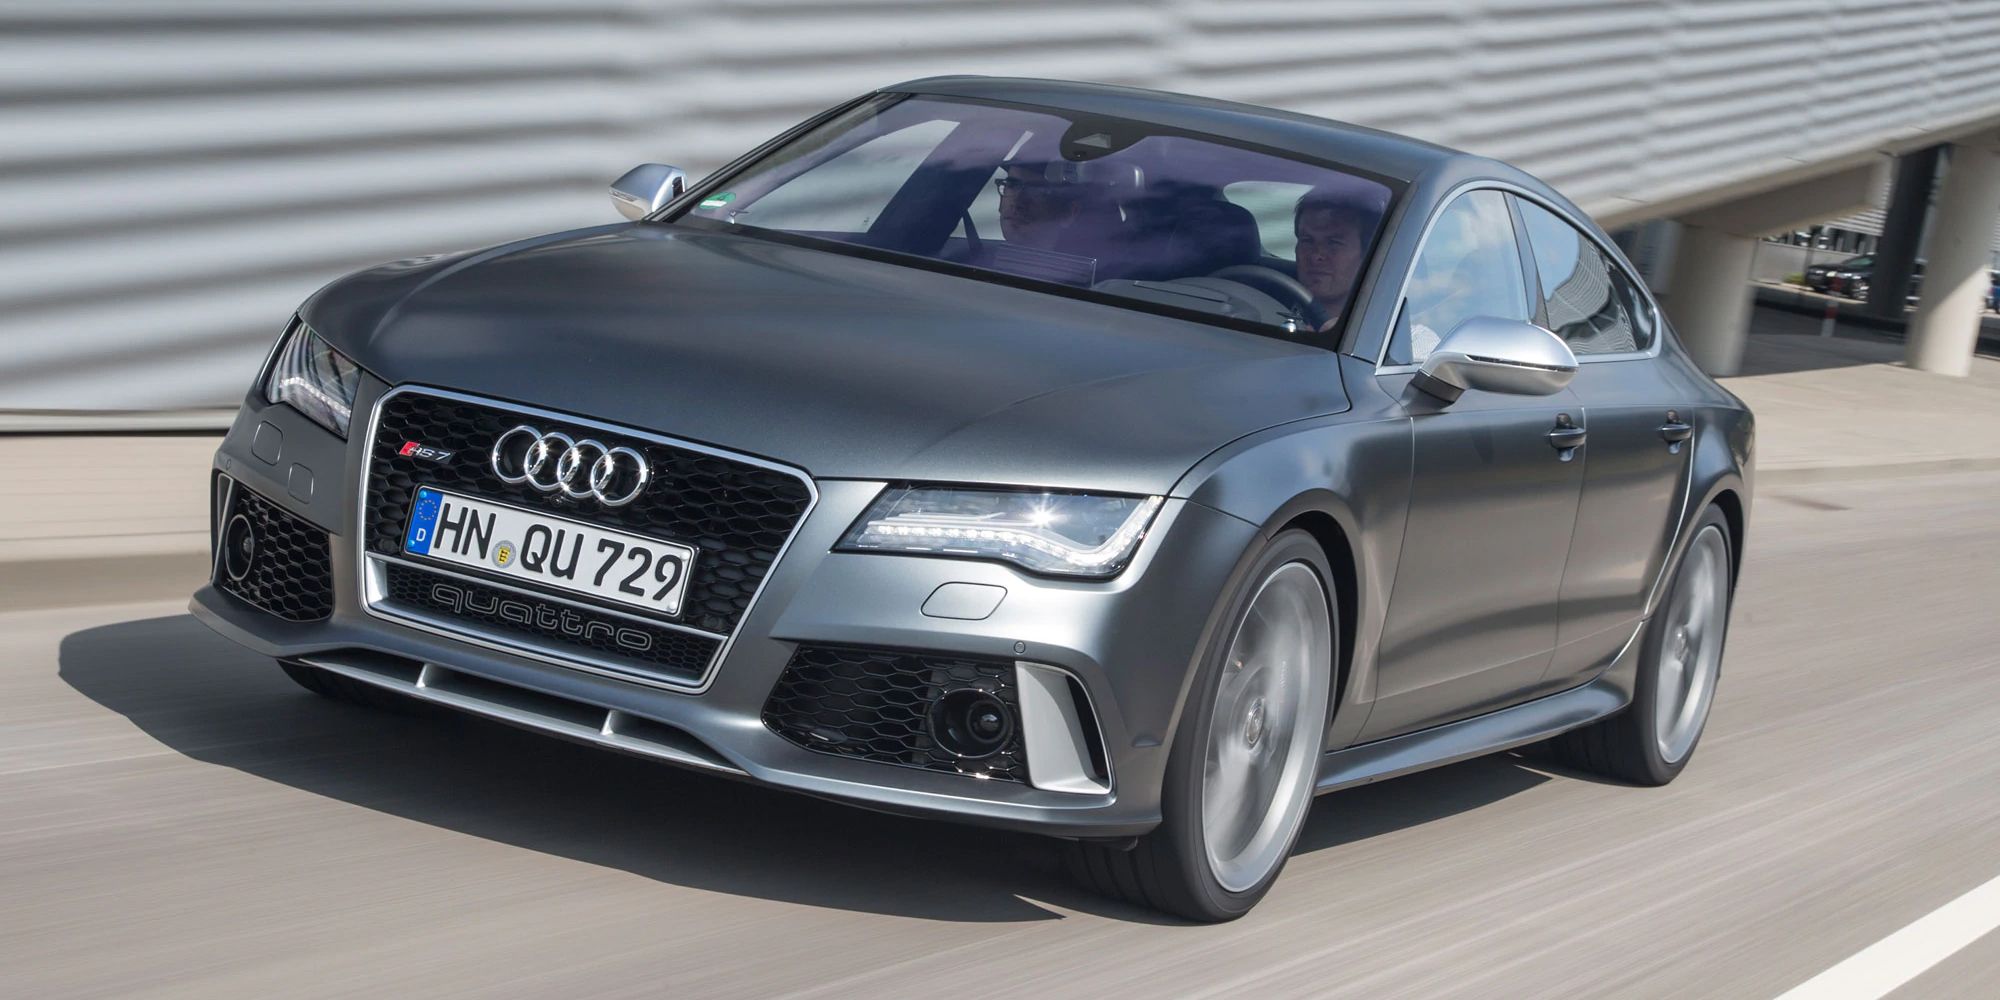 The front of the RS7